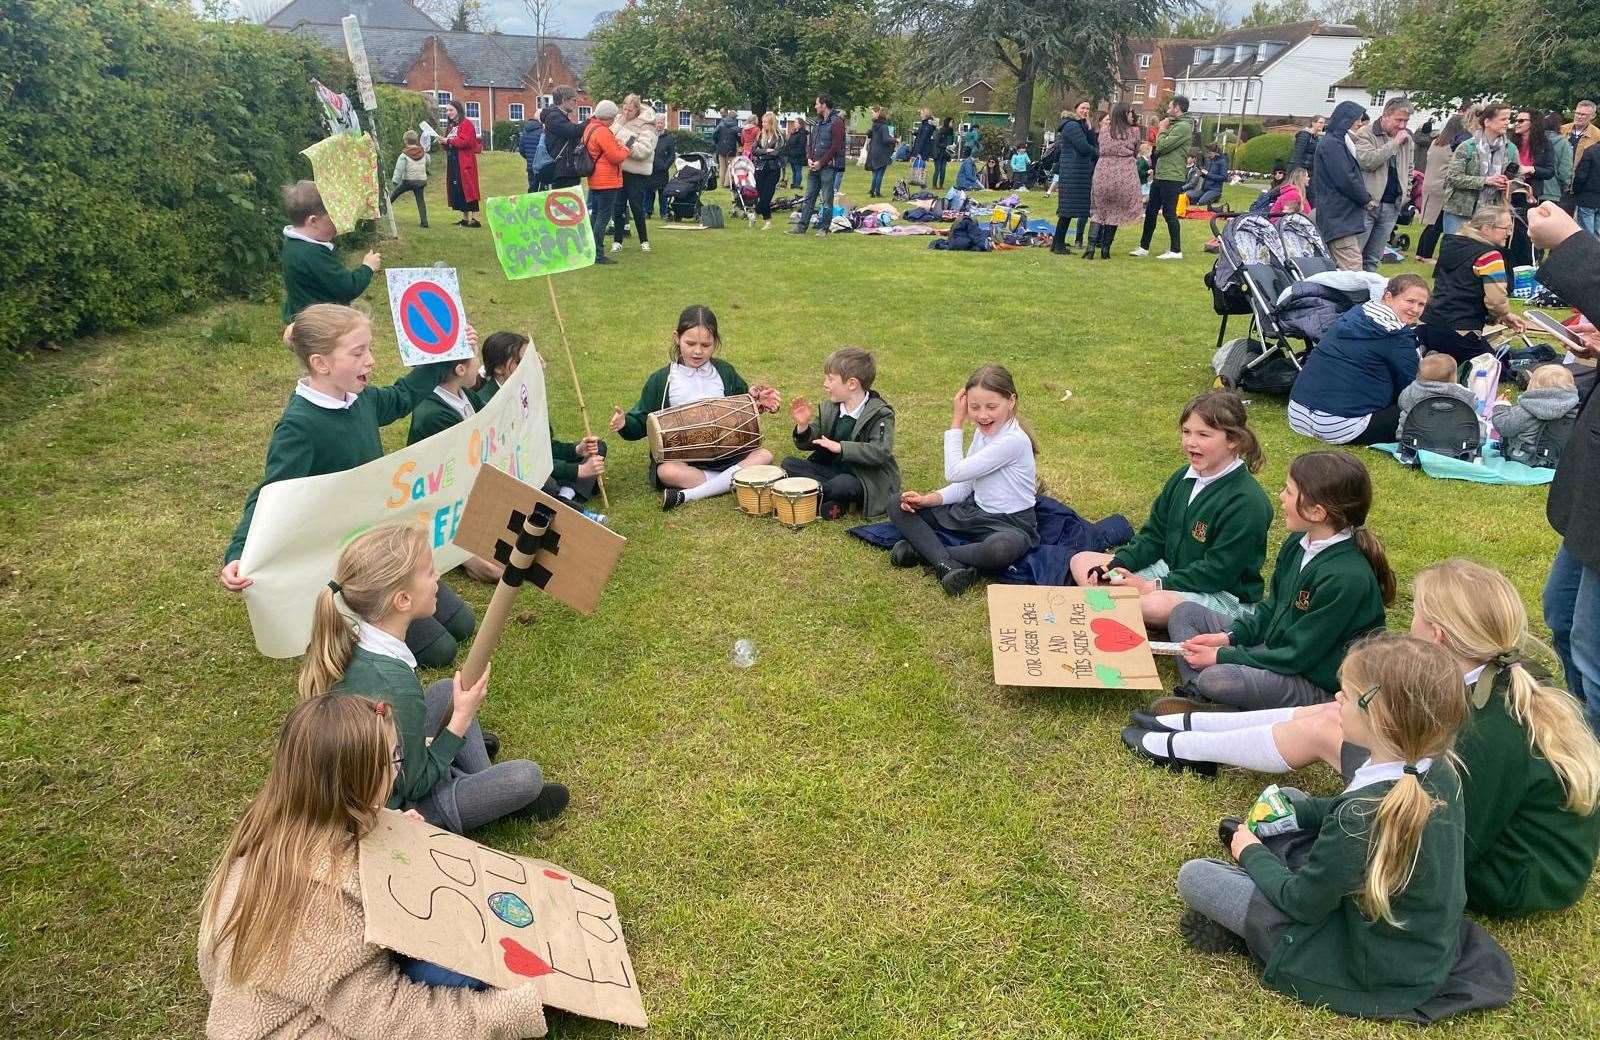 The children enhanced their protest with bongo playing